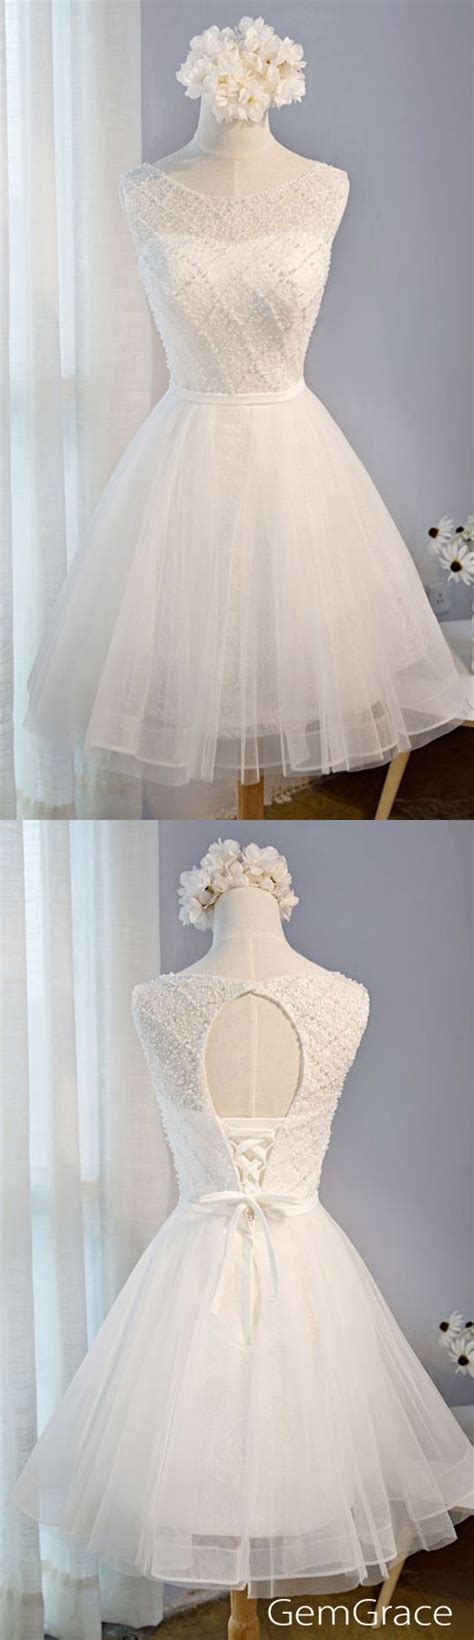 Gorgeous Short Tulle Homecoming Dresses Princess Ball Gown